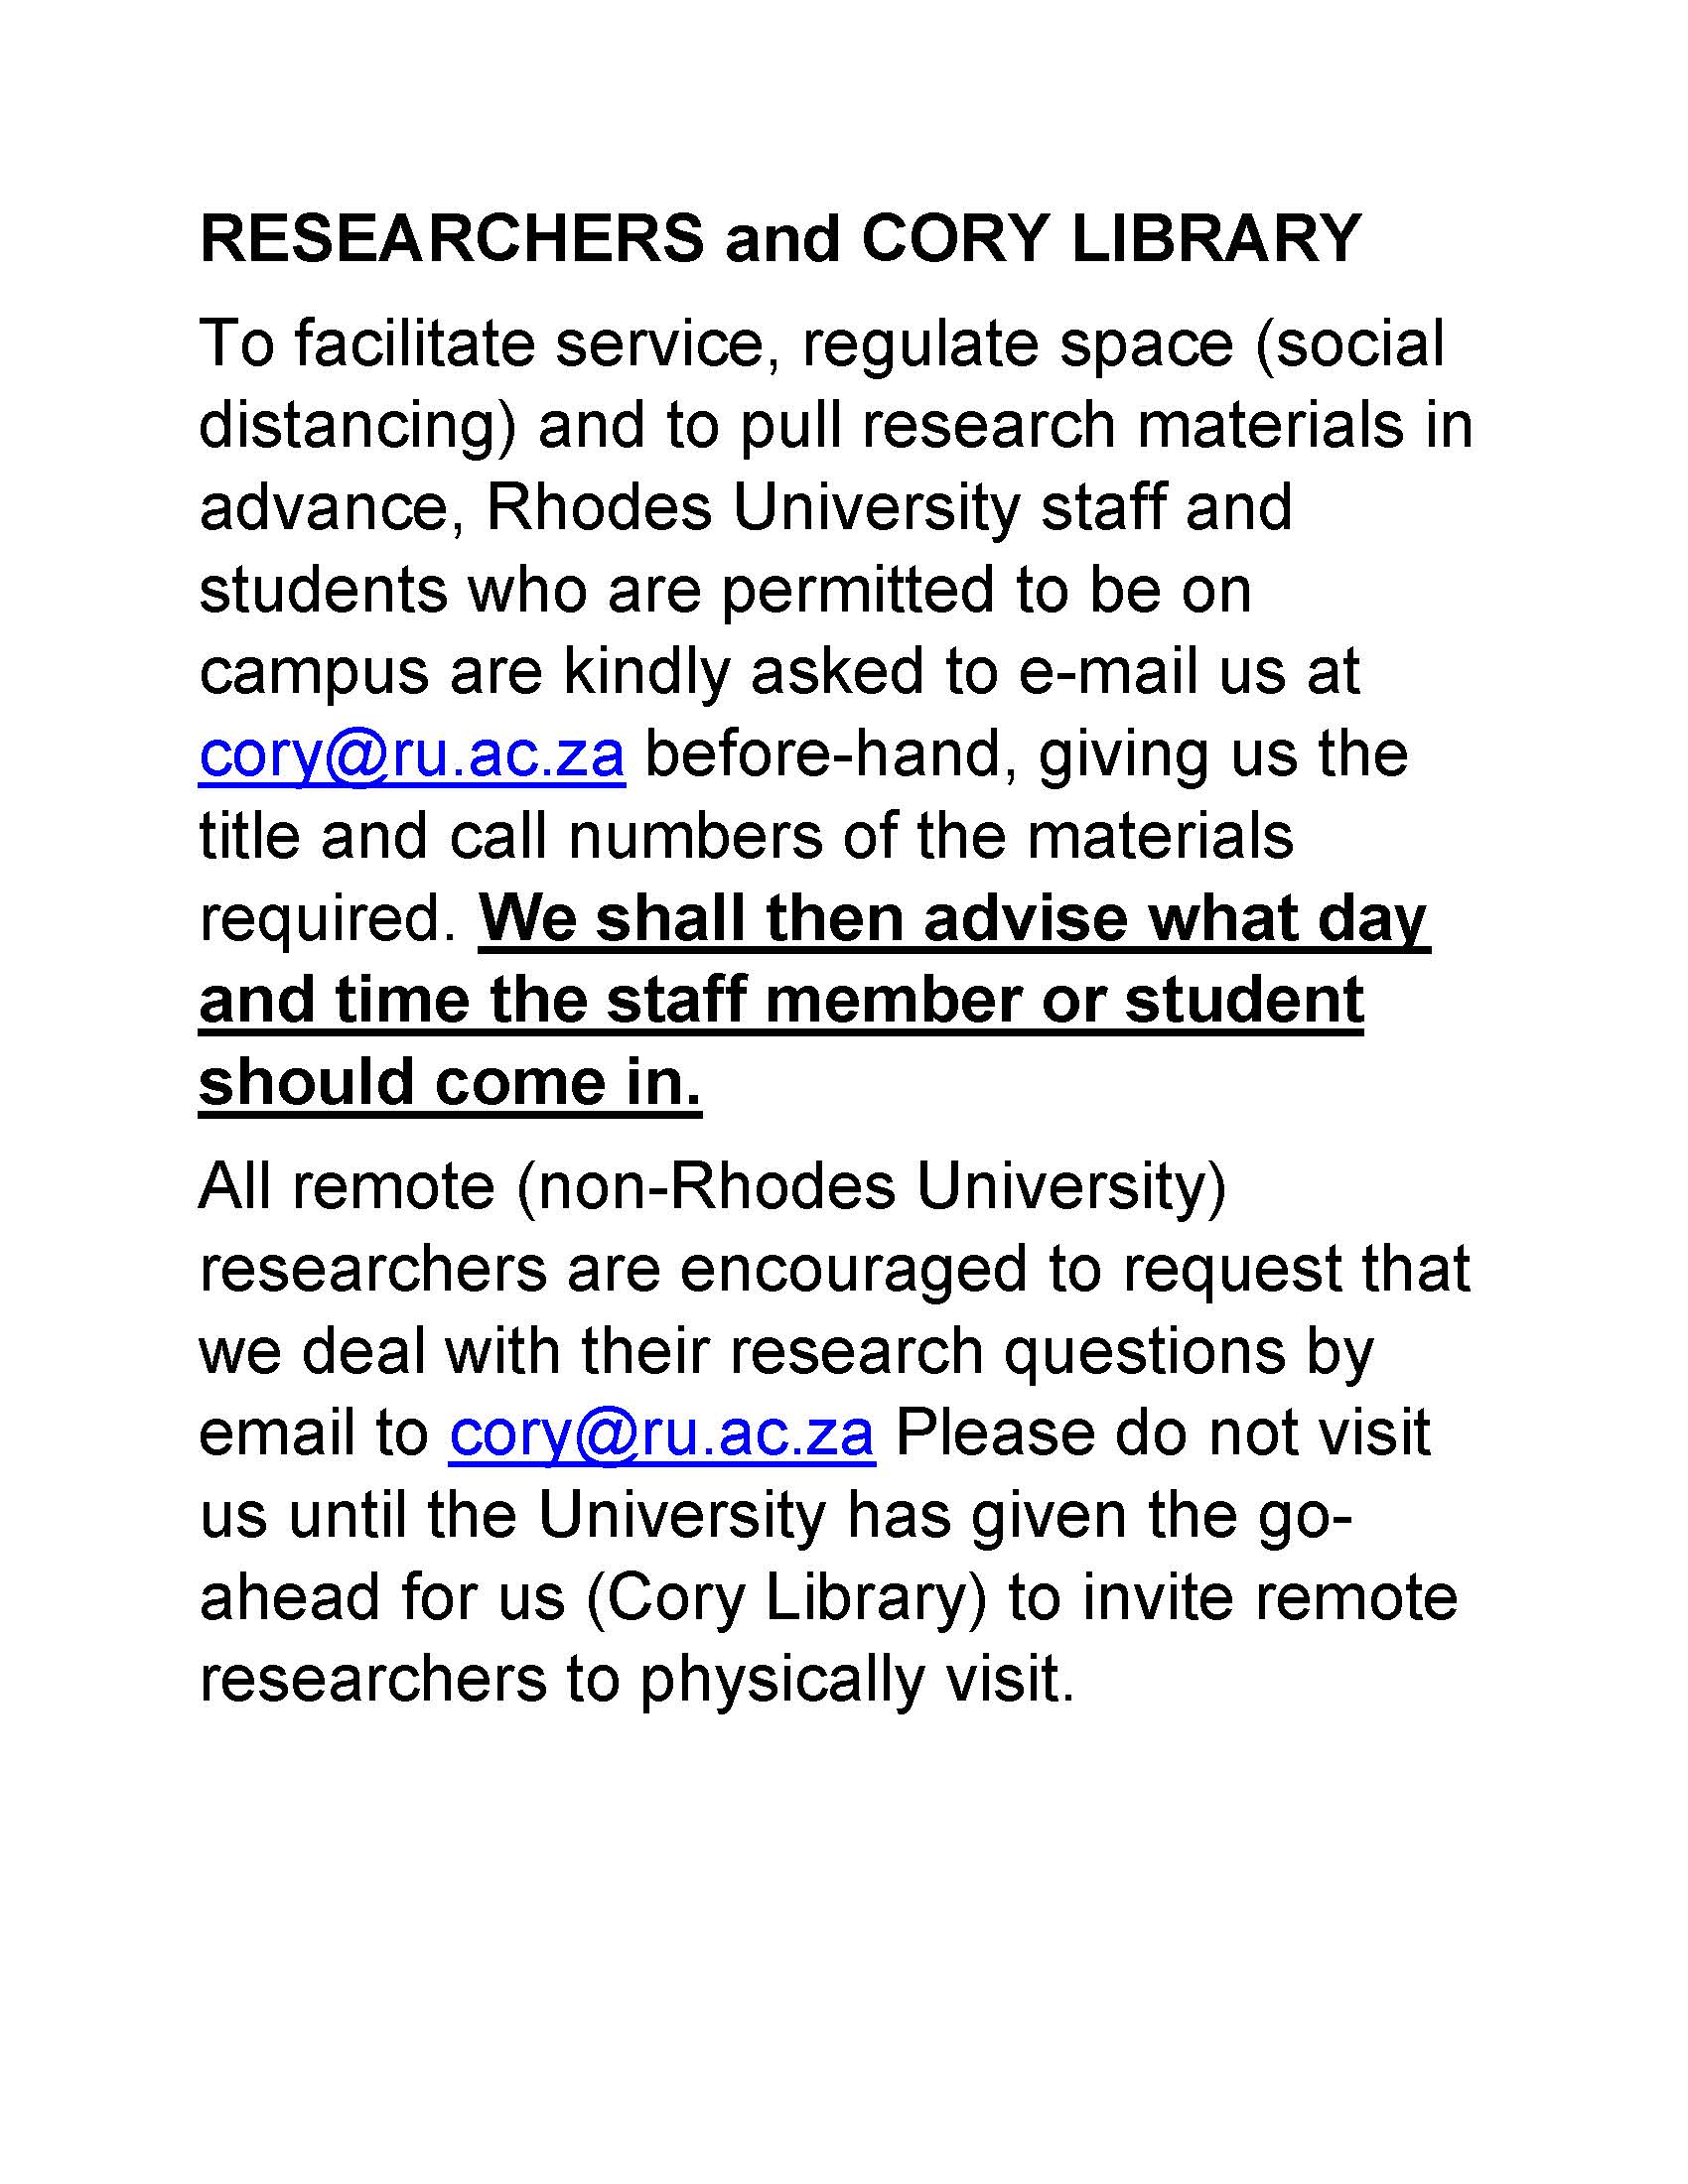 Cory Library notice to researchers